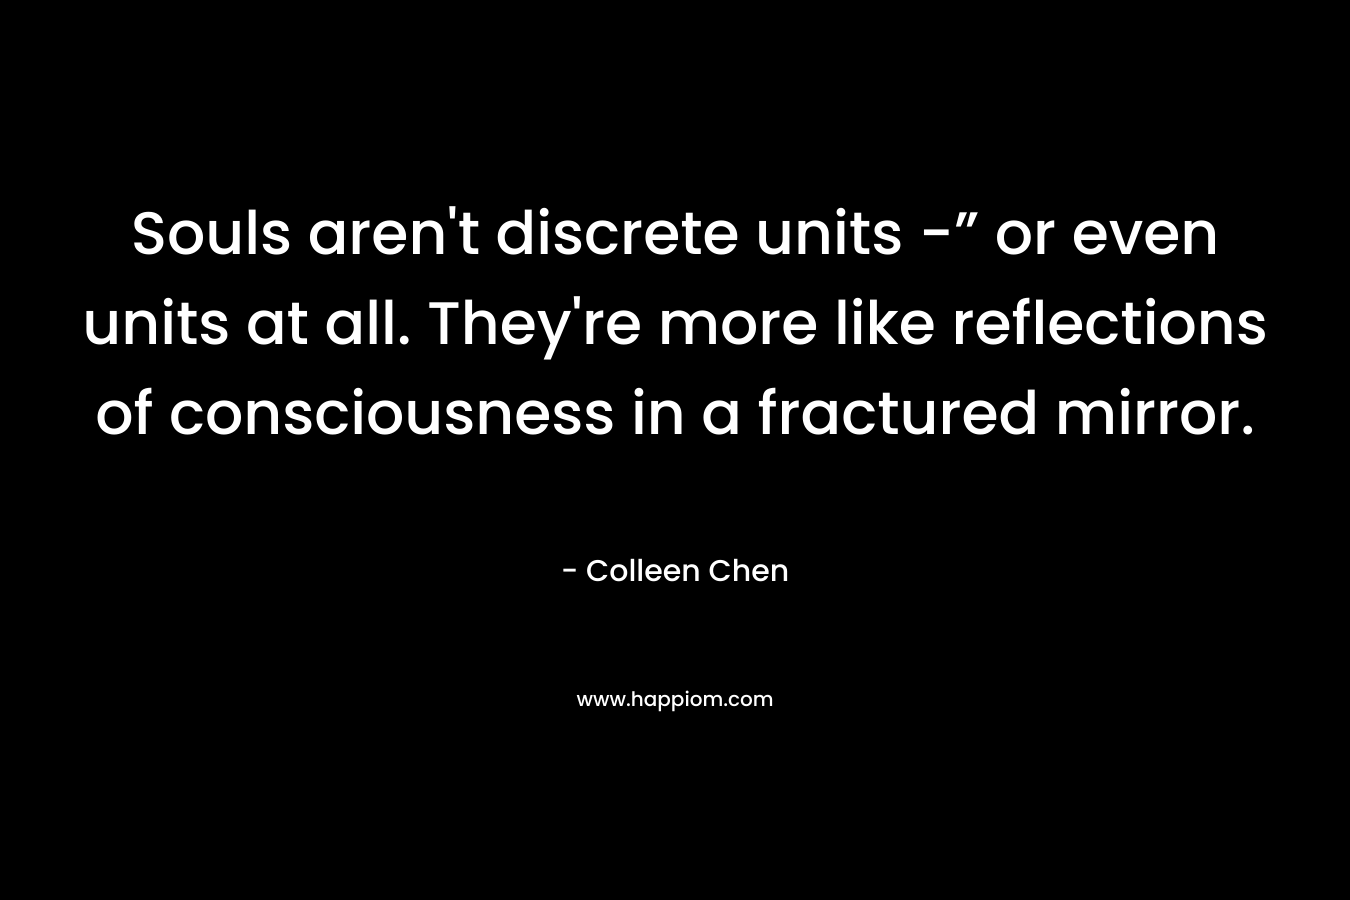 Souls aren’t discrete units -” or even units at all. They’re more like reflections of consciousness in a fractured mirror. – Colleen Chen